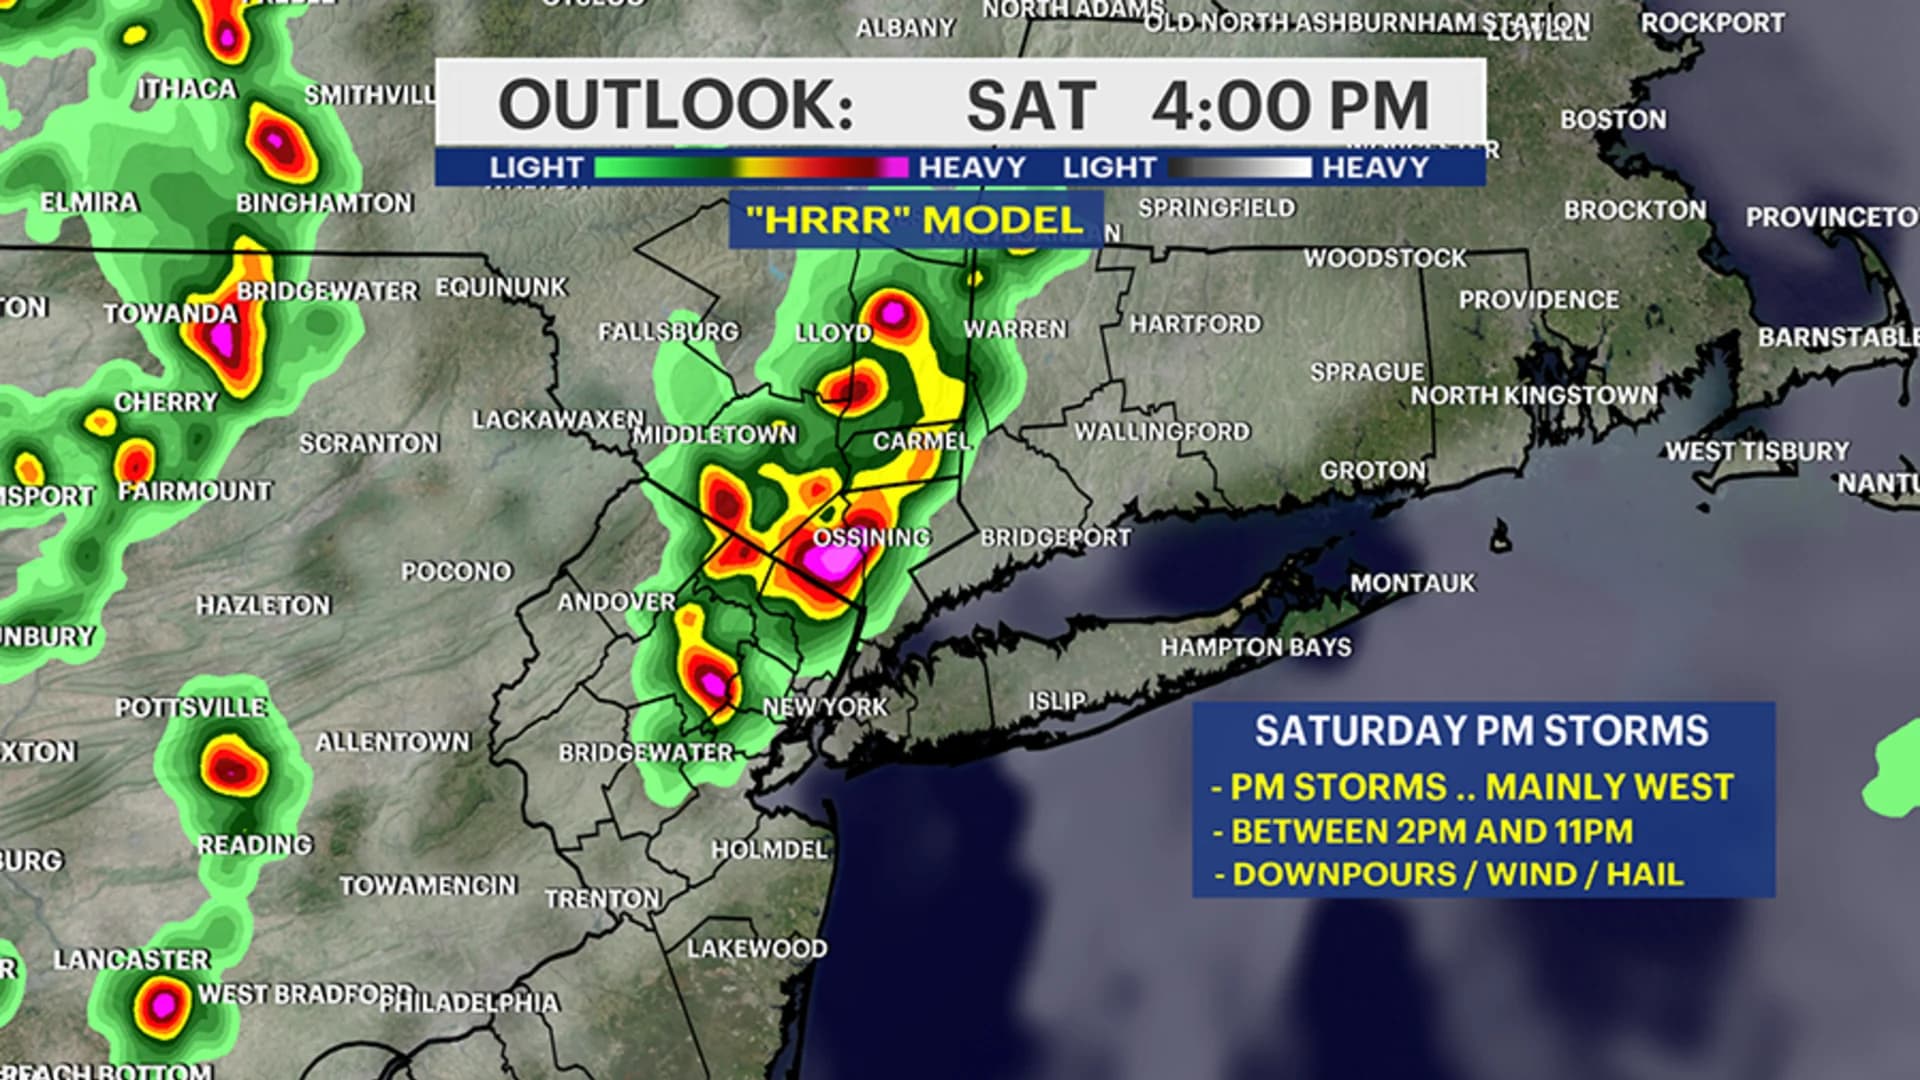 Late-day storms bring chance of damaging winds, hail, localized flooding